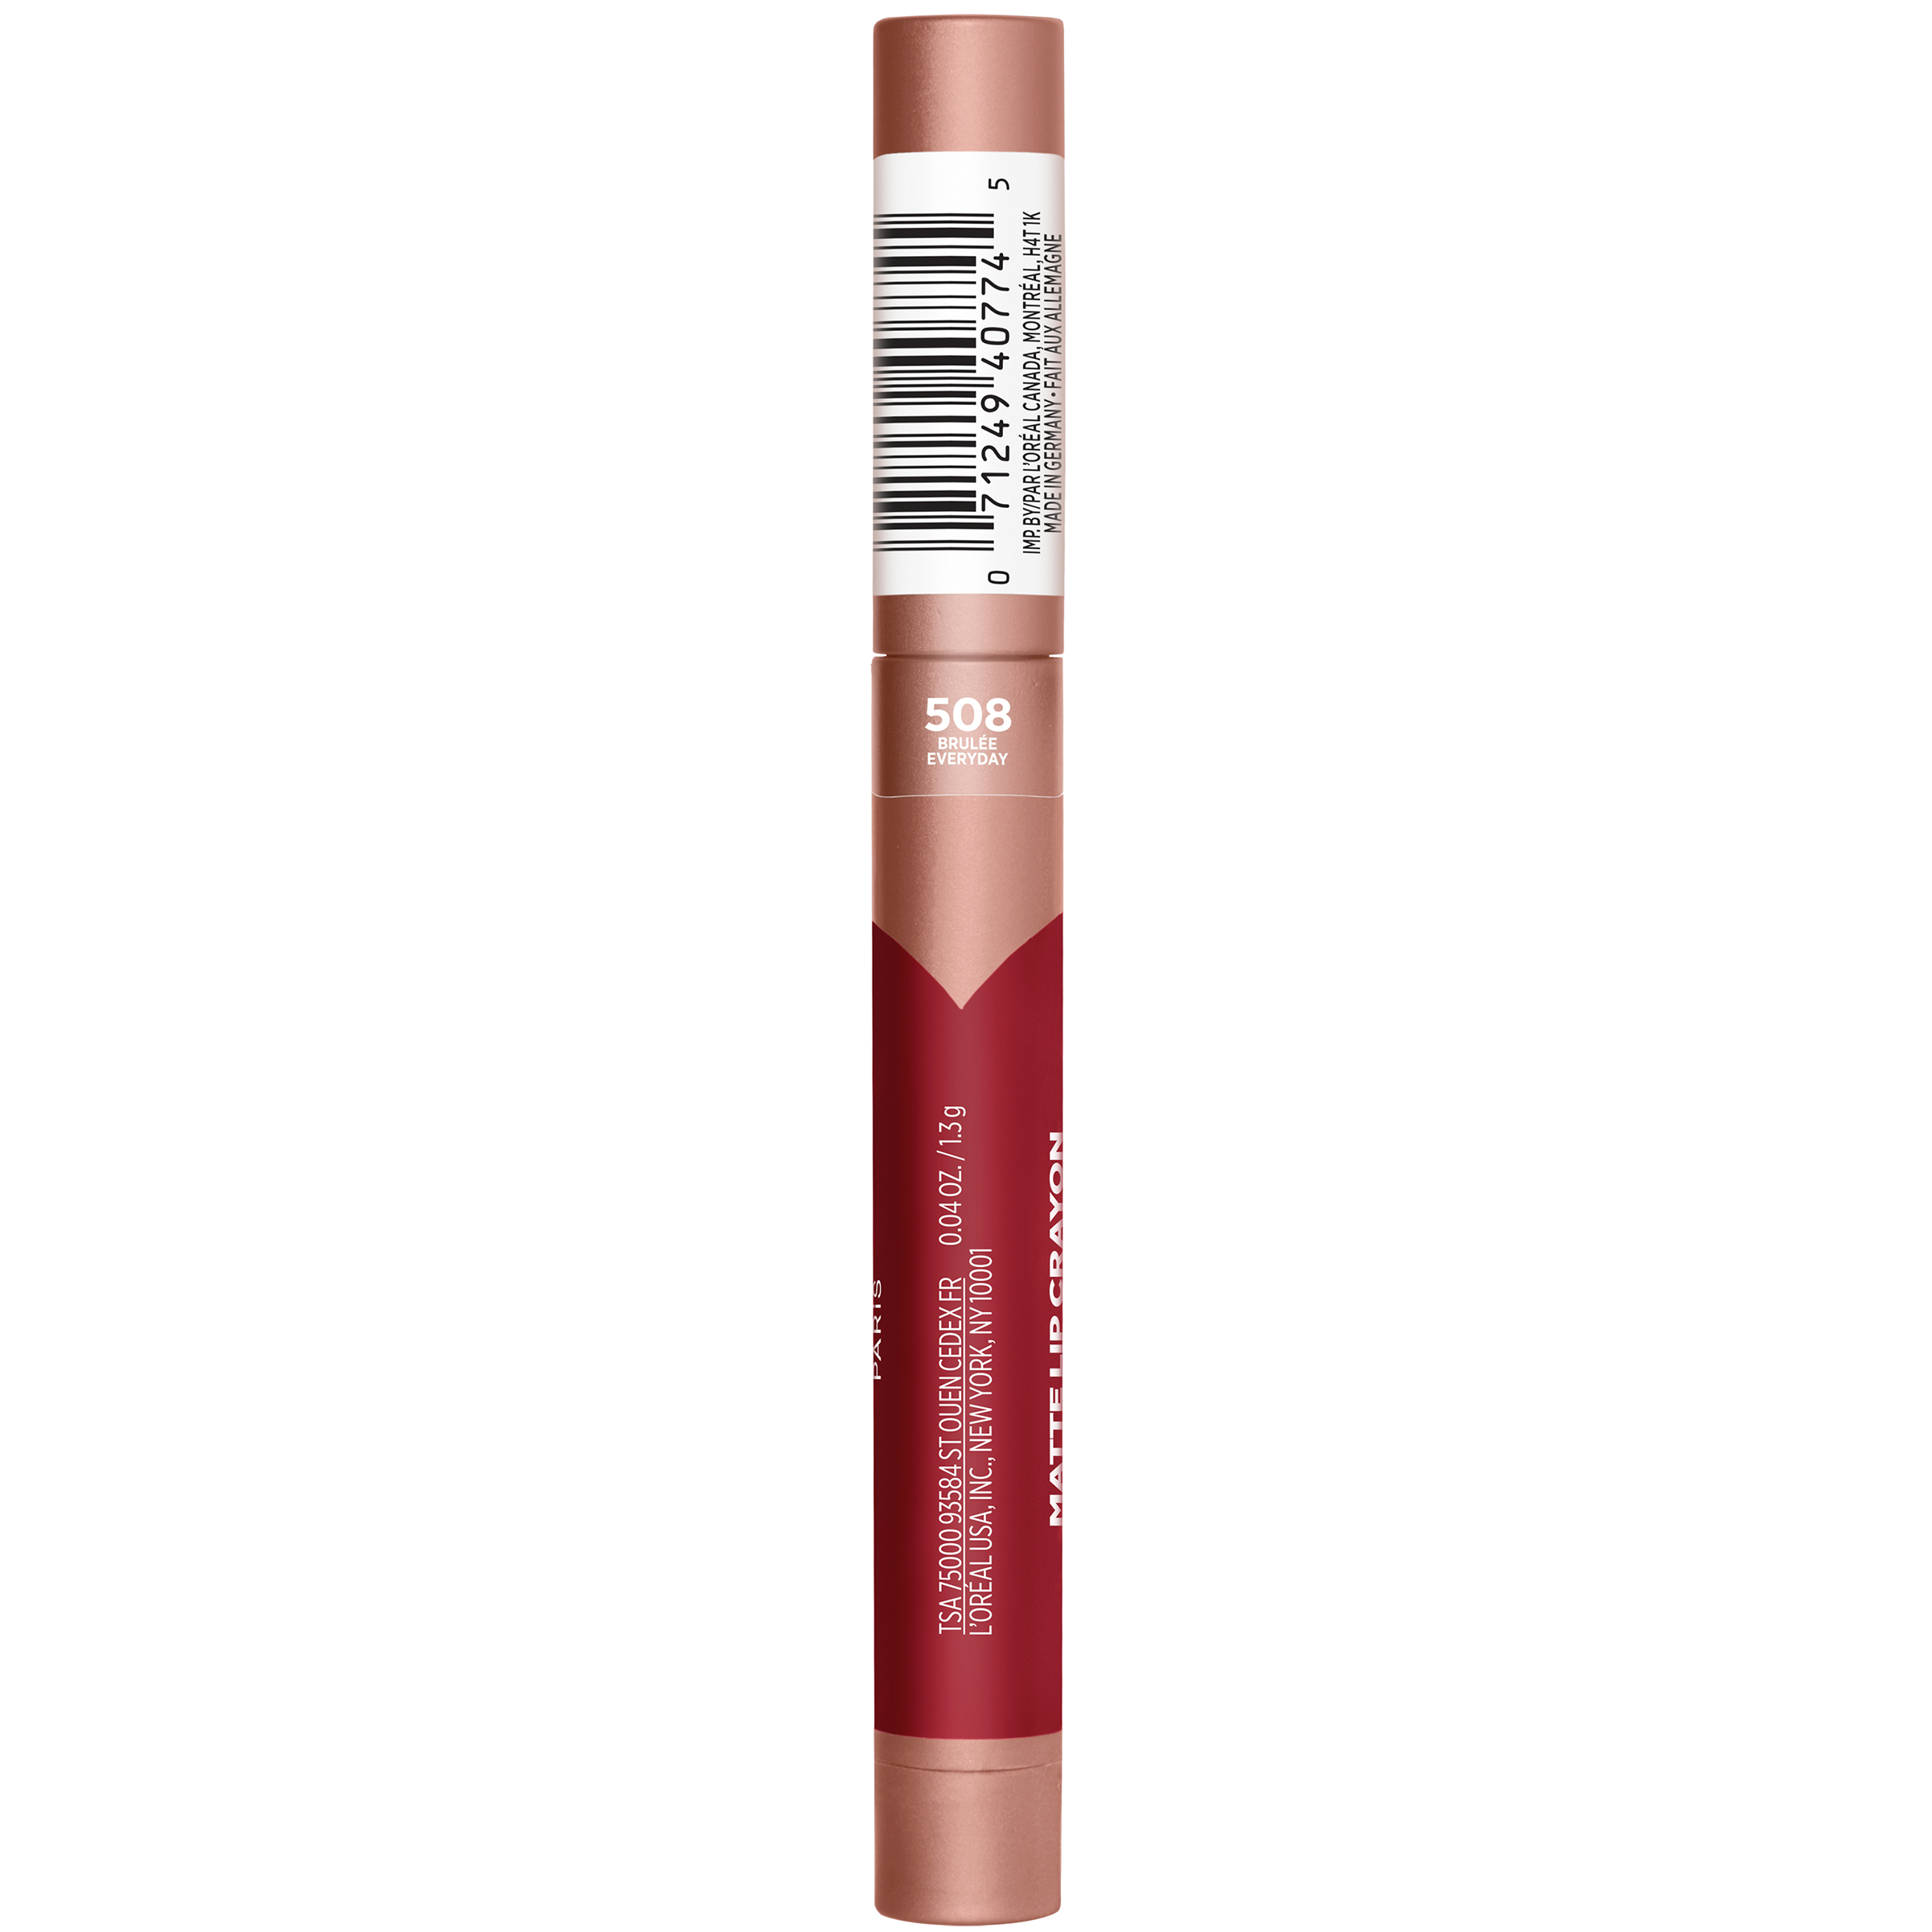 L'Oreal Paris Infallible Matte Lip Crayon, Lasting Wear, Smudge Resistant, Brulee Everyday, 0.04 oz. - image 2 of 4